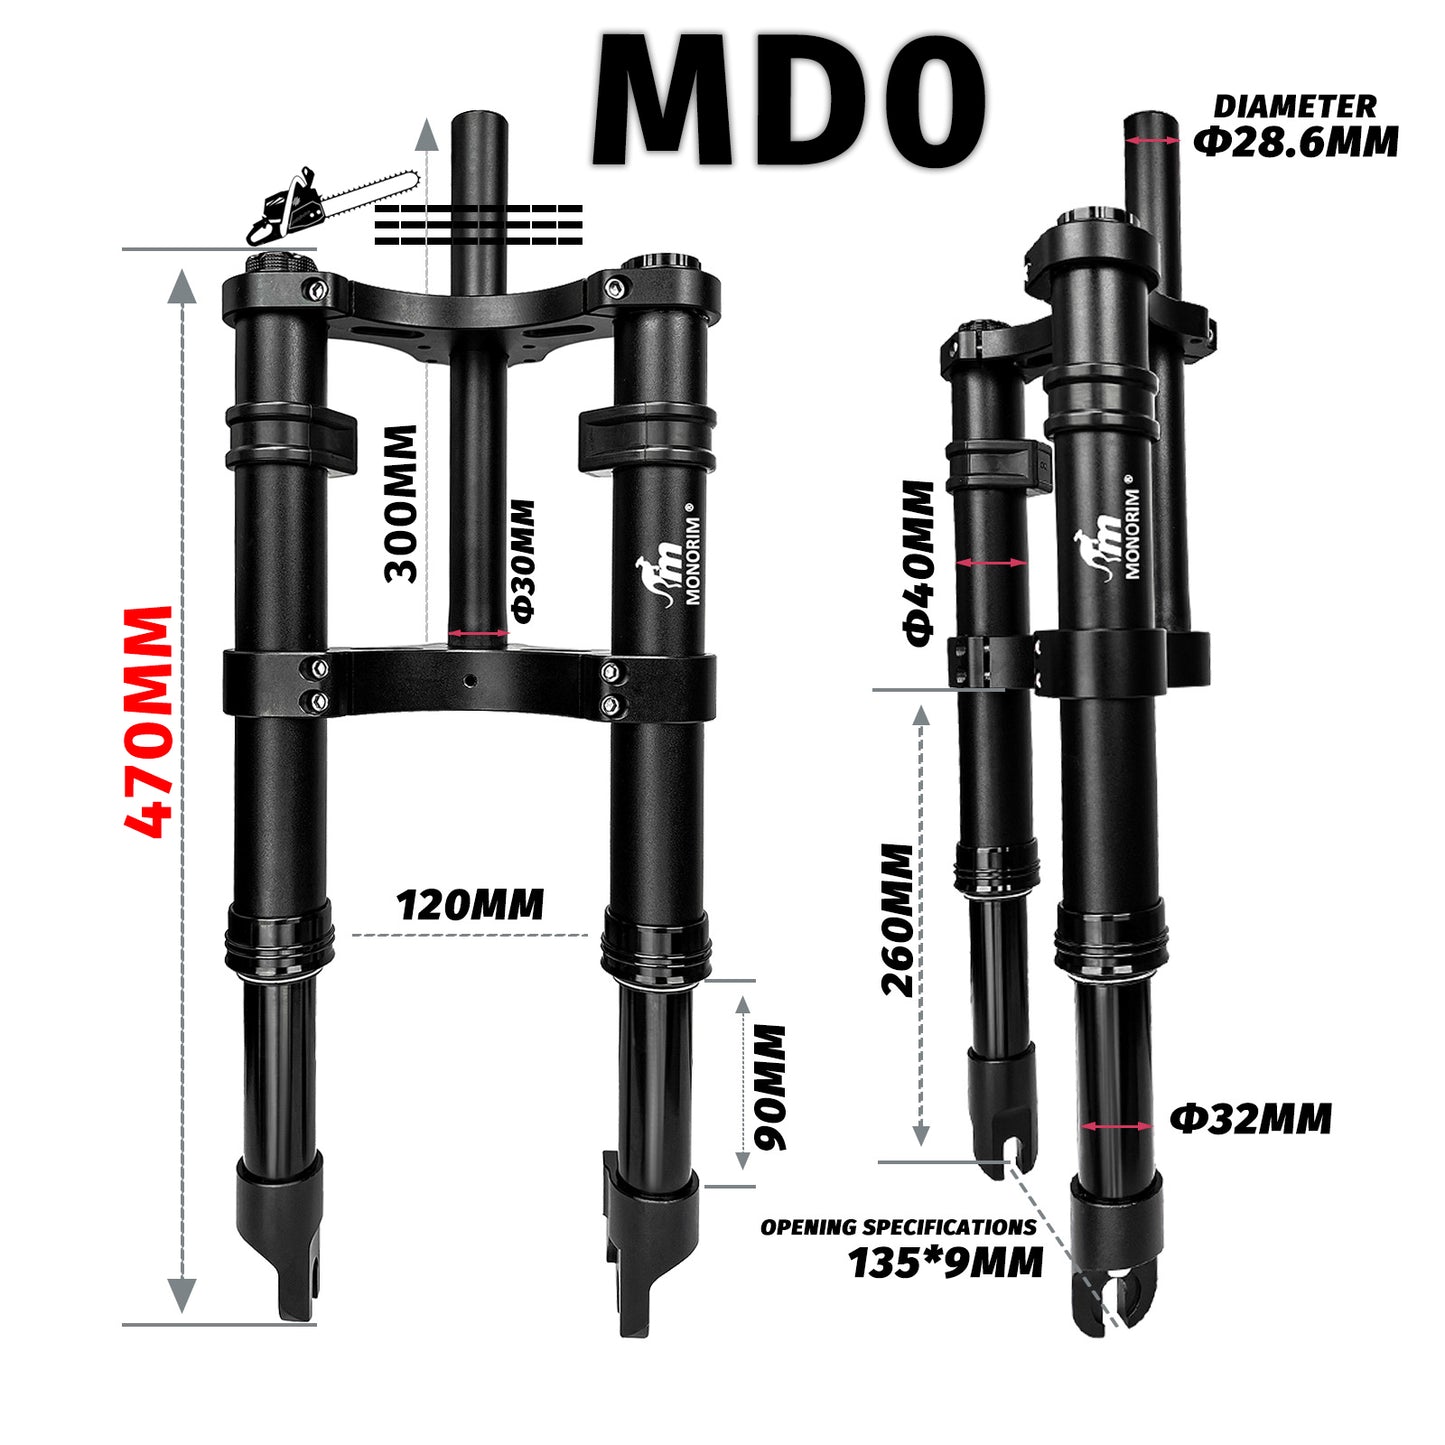 Monorim MD0-14inch front suspension modify great kit to be more safety and comfort for DYU D3+ ebike ：